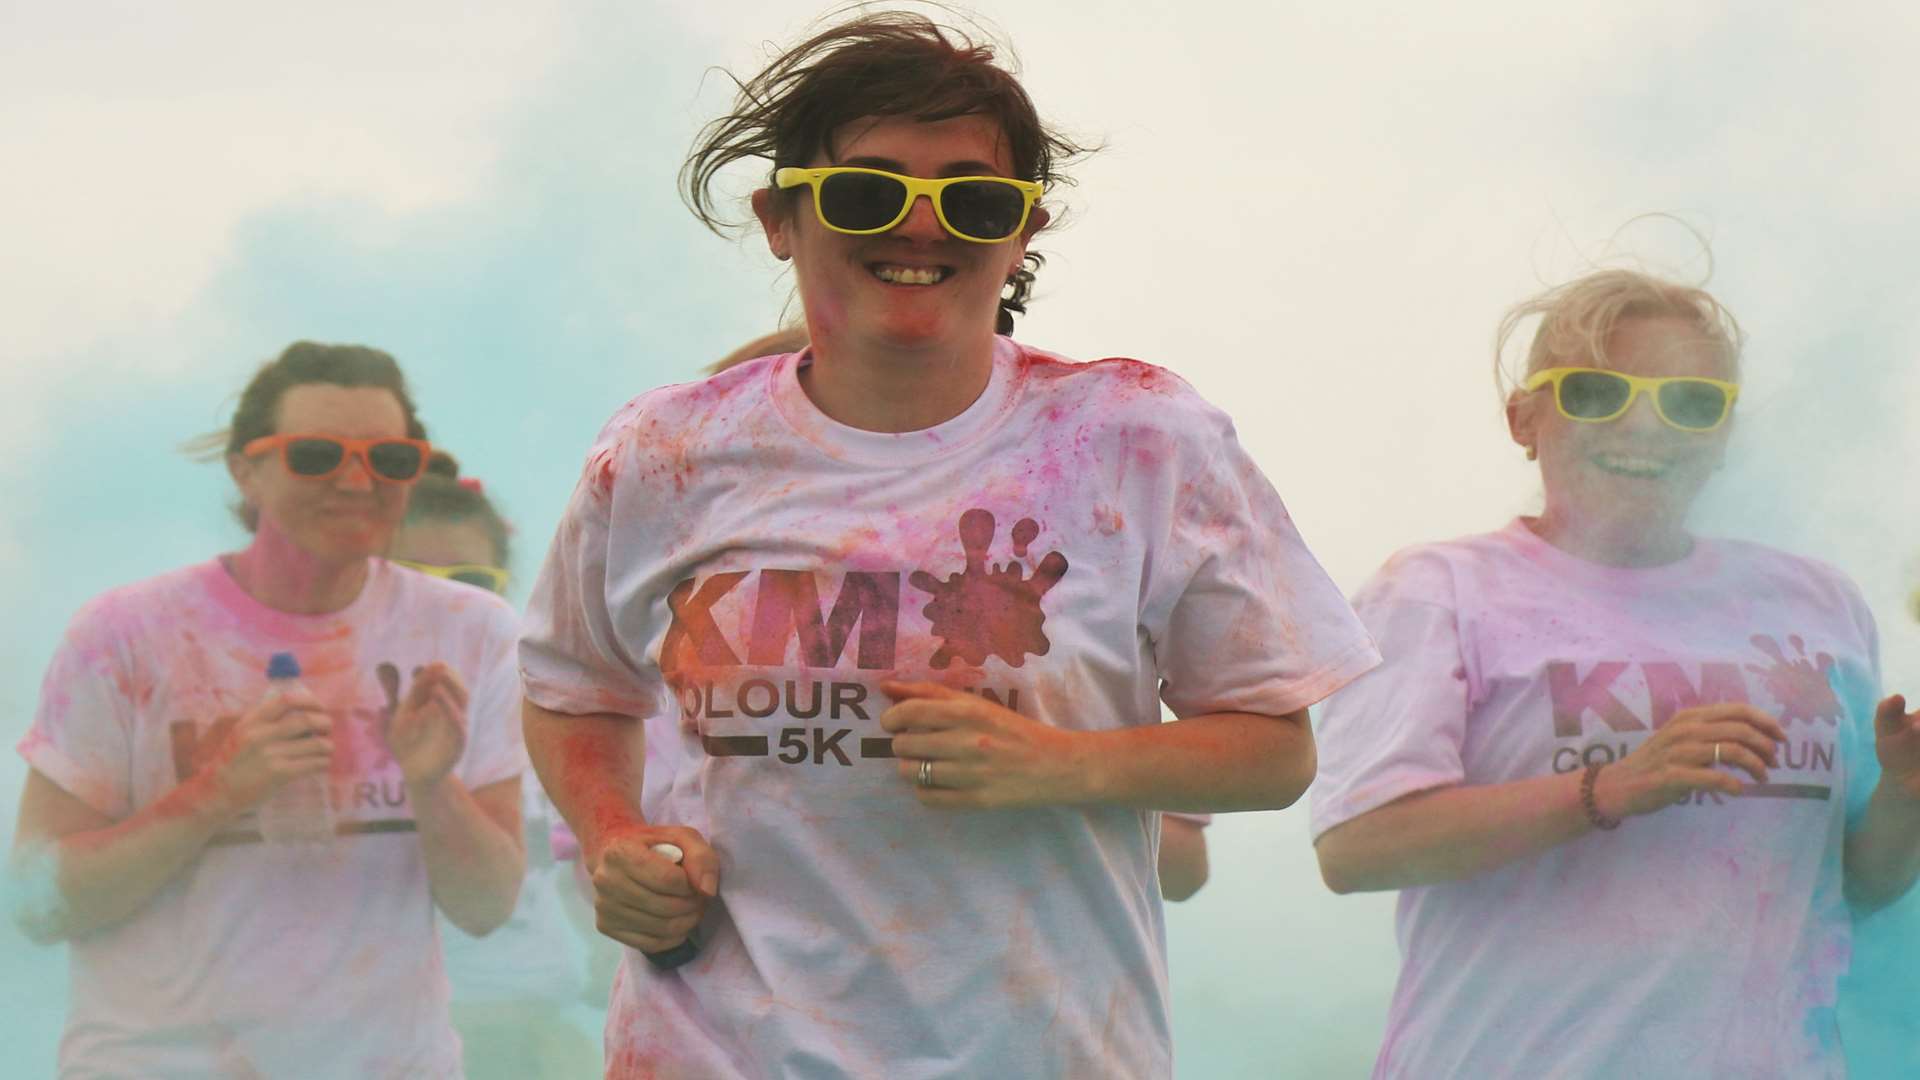 KM Charity of the Year winners can benefit from collaborative events with the KM Charity Team such as the KM Colour Run to help boost their profile and fundraising.